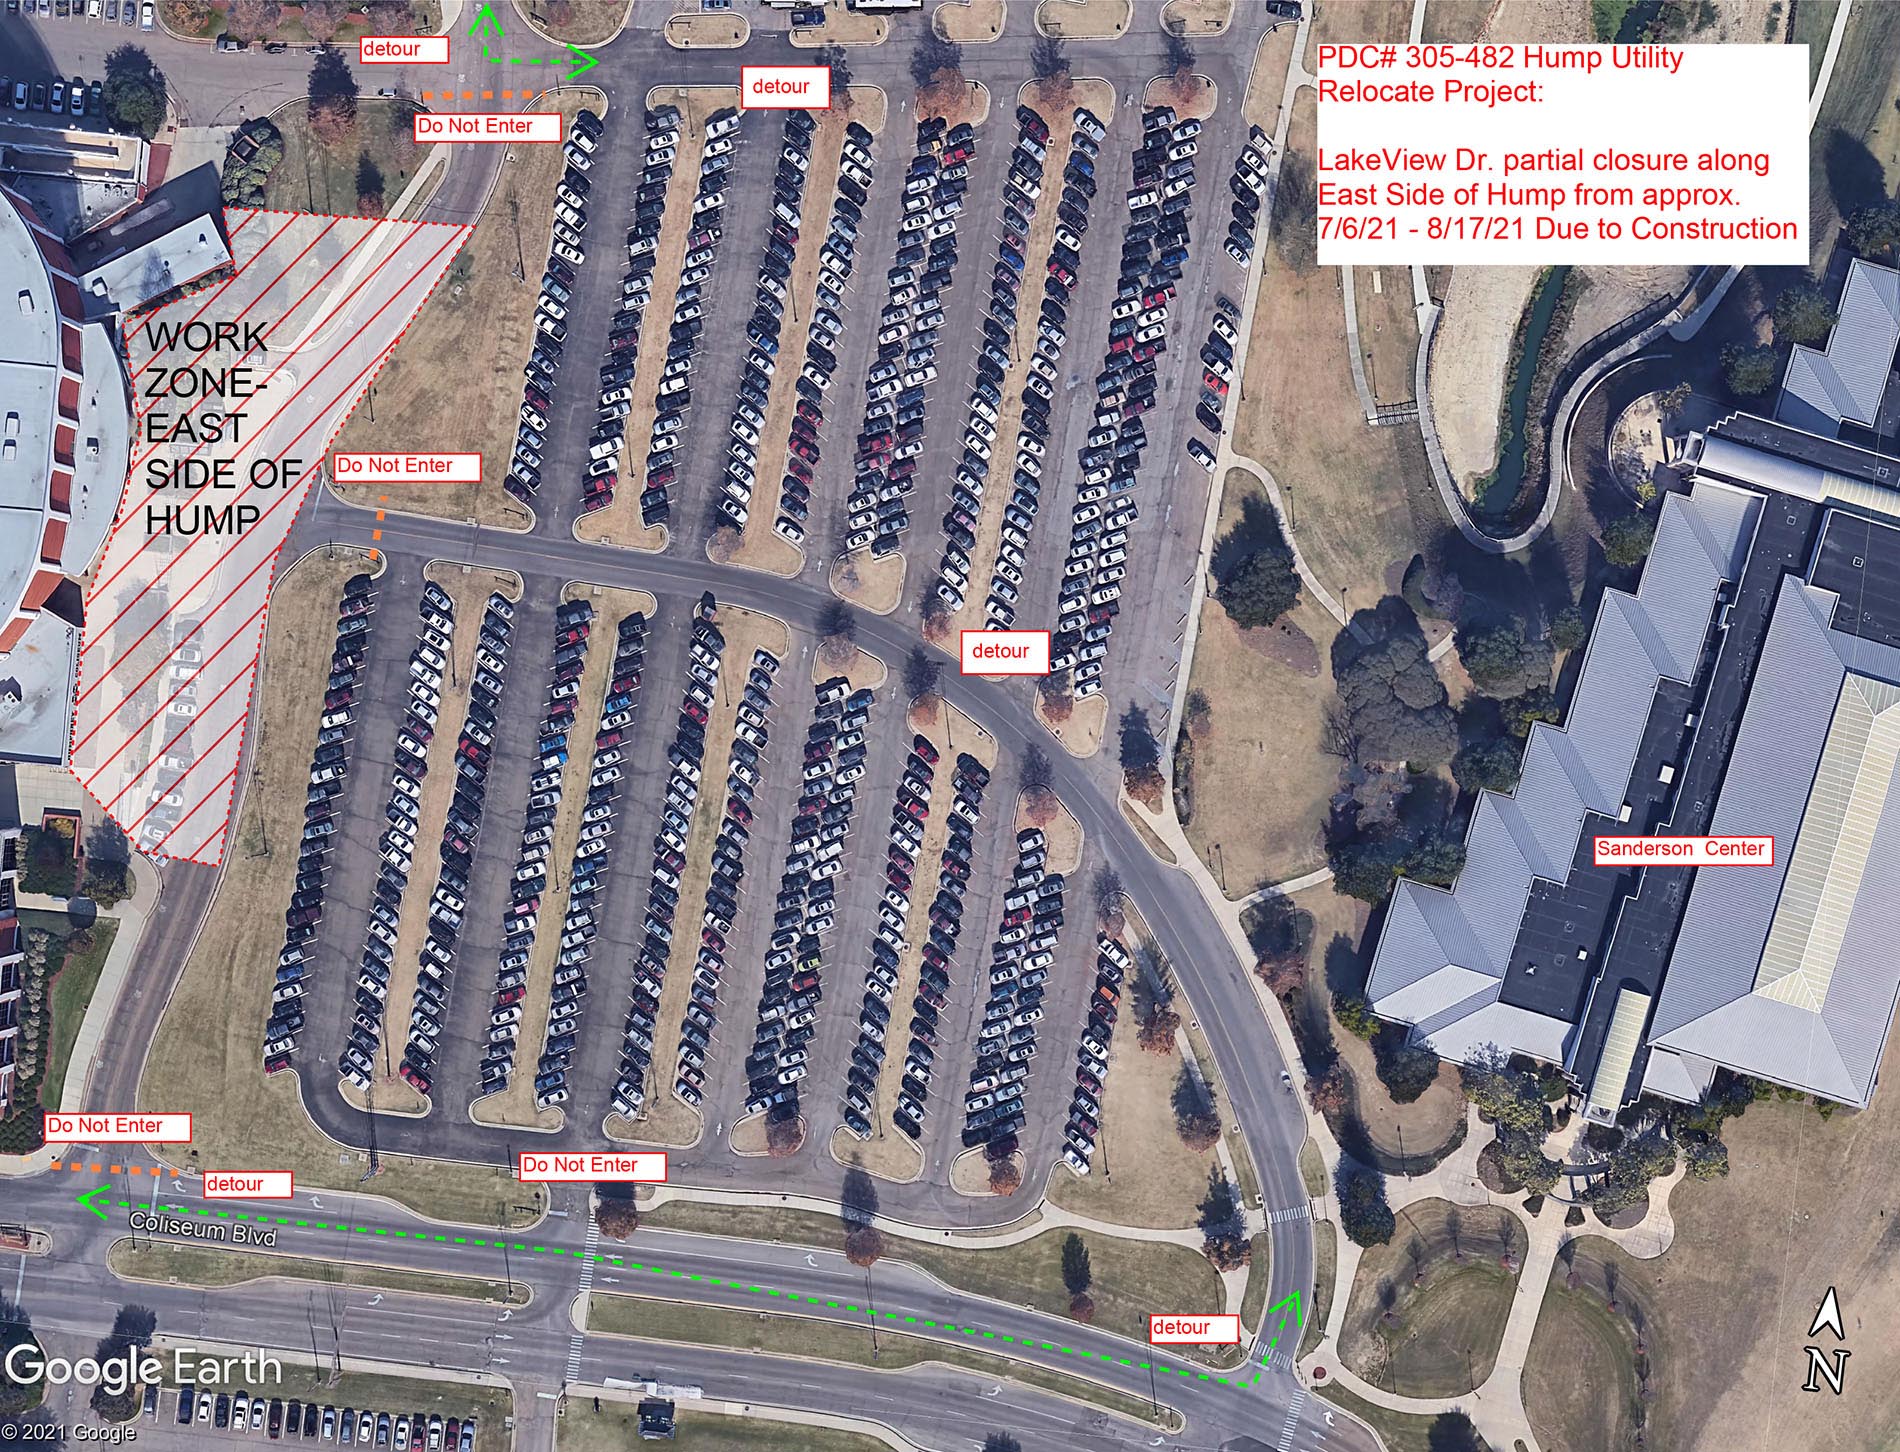 Construction map with a bird's eye view of Humphrey Coliseum, the Joe Frank Sanderson Center and nearby parking lots